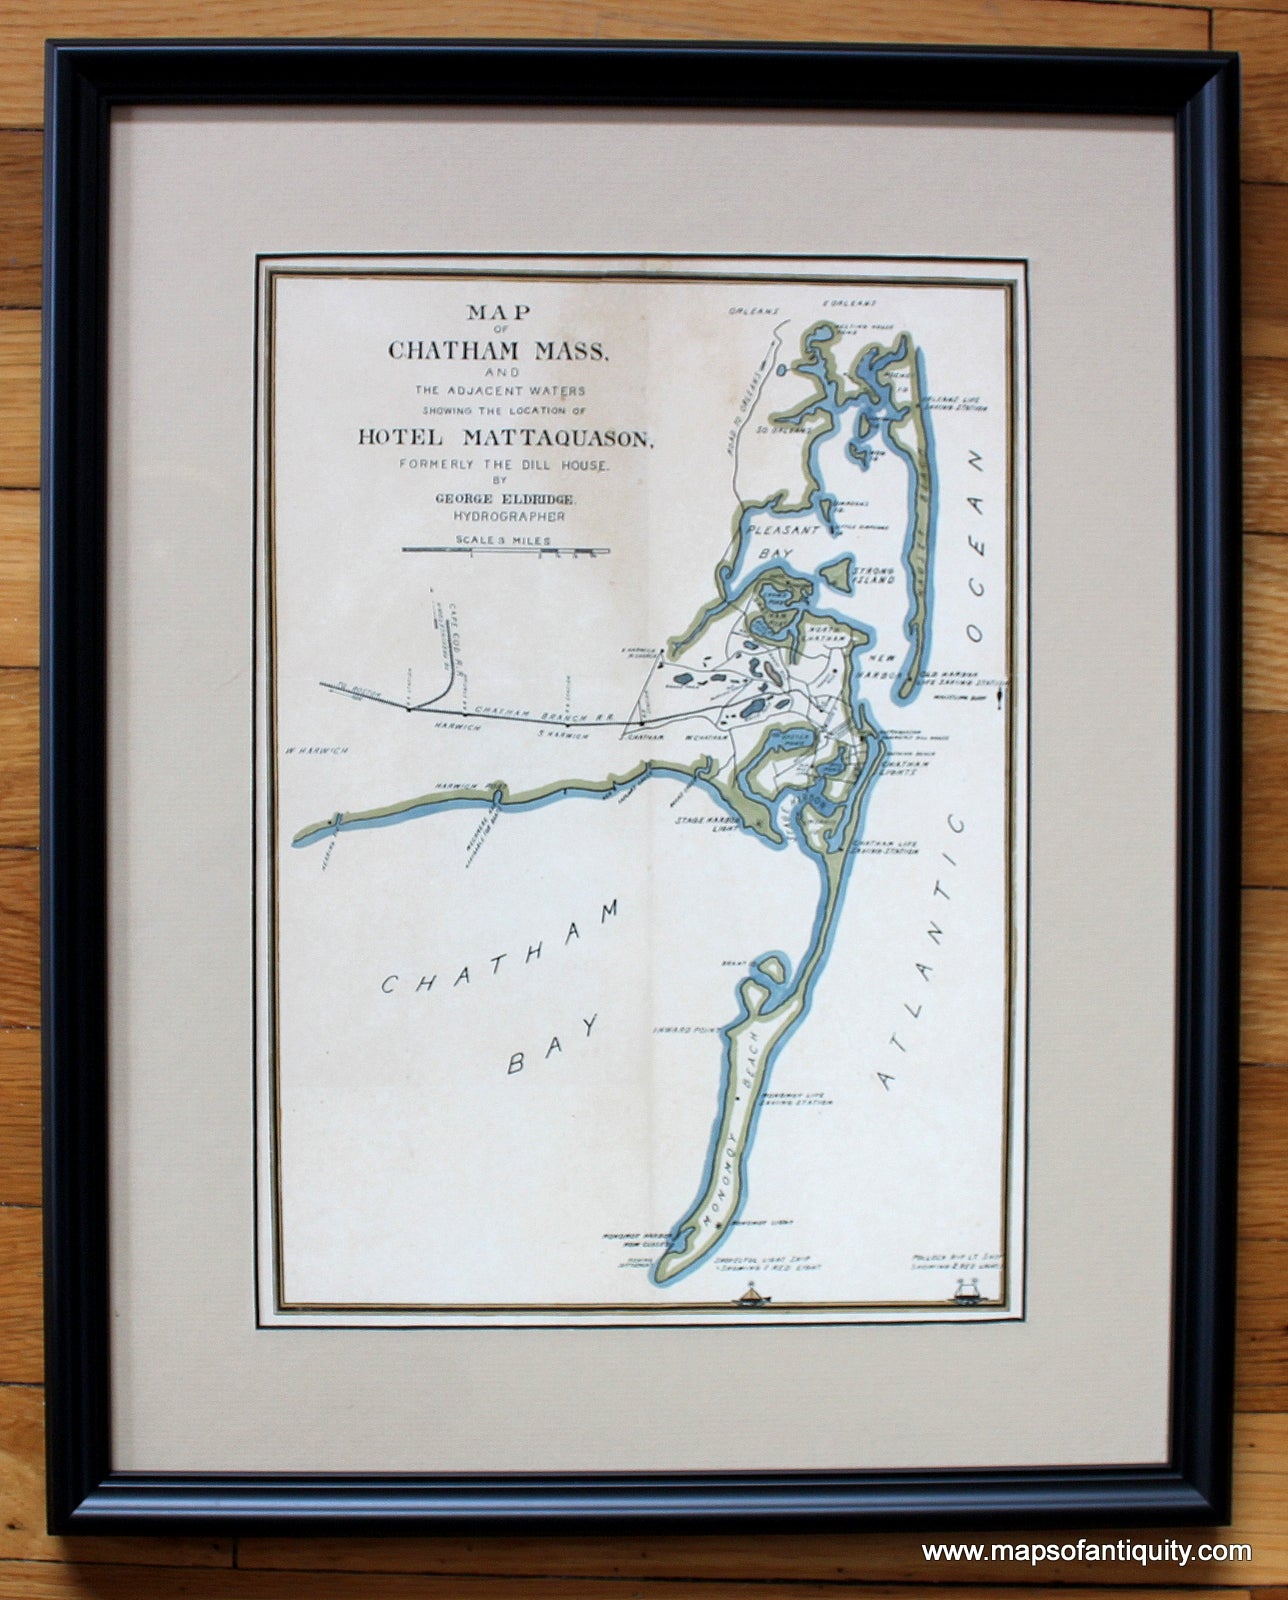 Framed-Hand-Colored-Print-of-Chatham-Mass